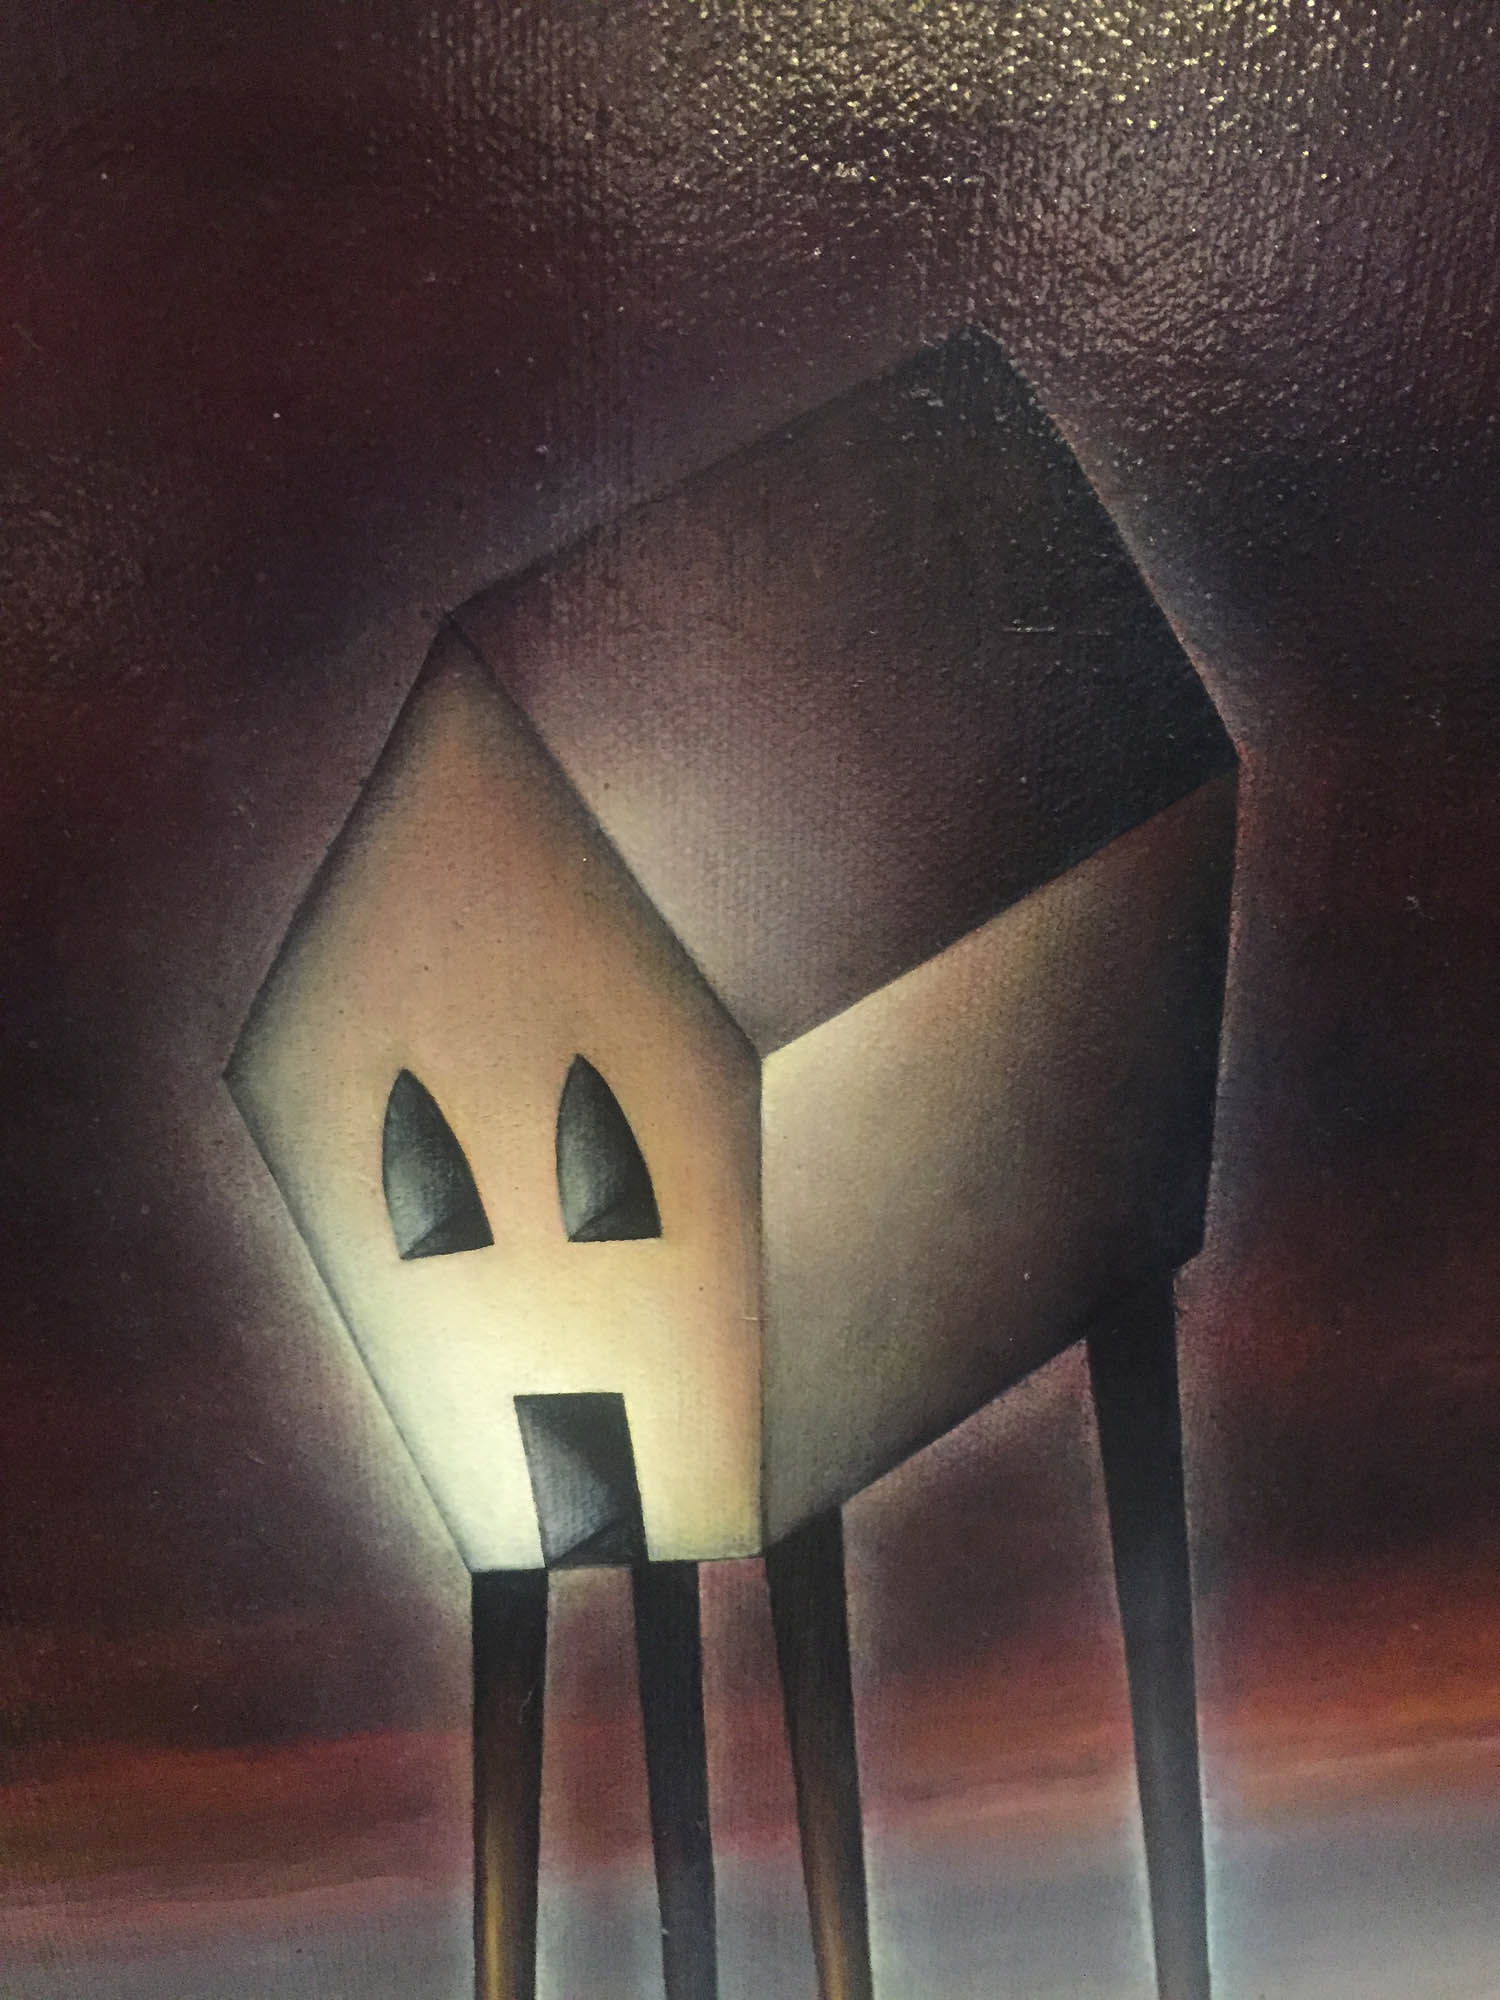 Home is more than a House by Peter Smith, Landscape | Love | Romance